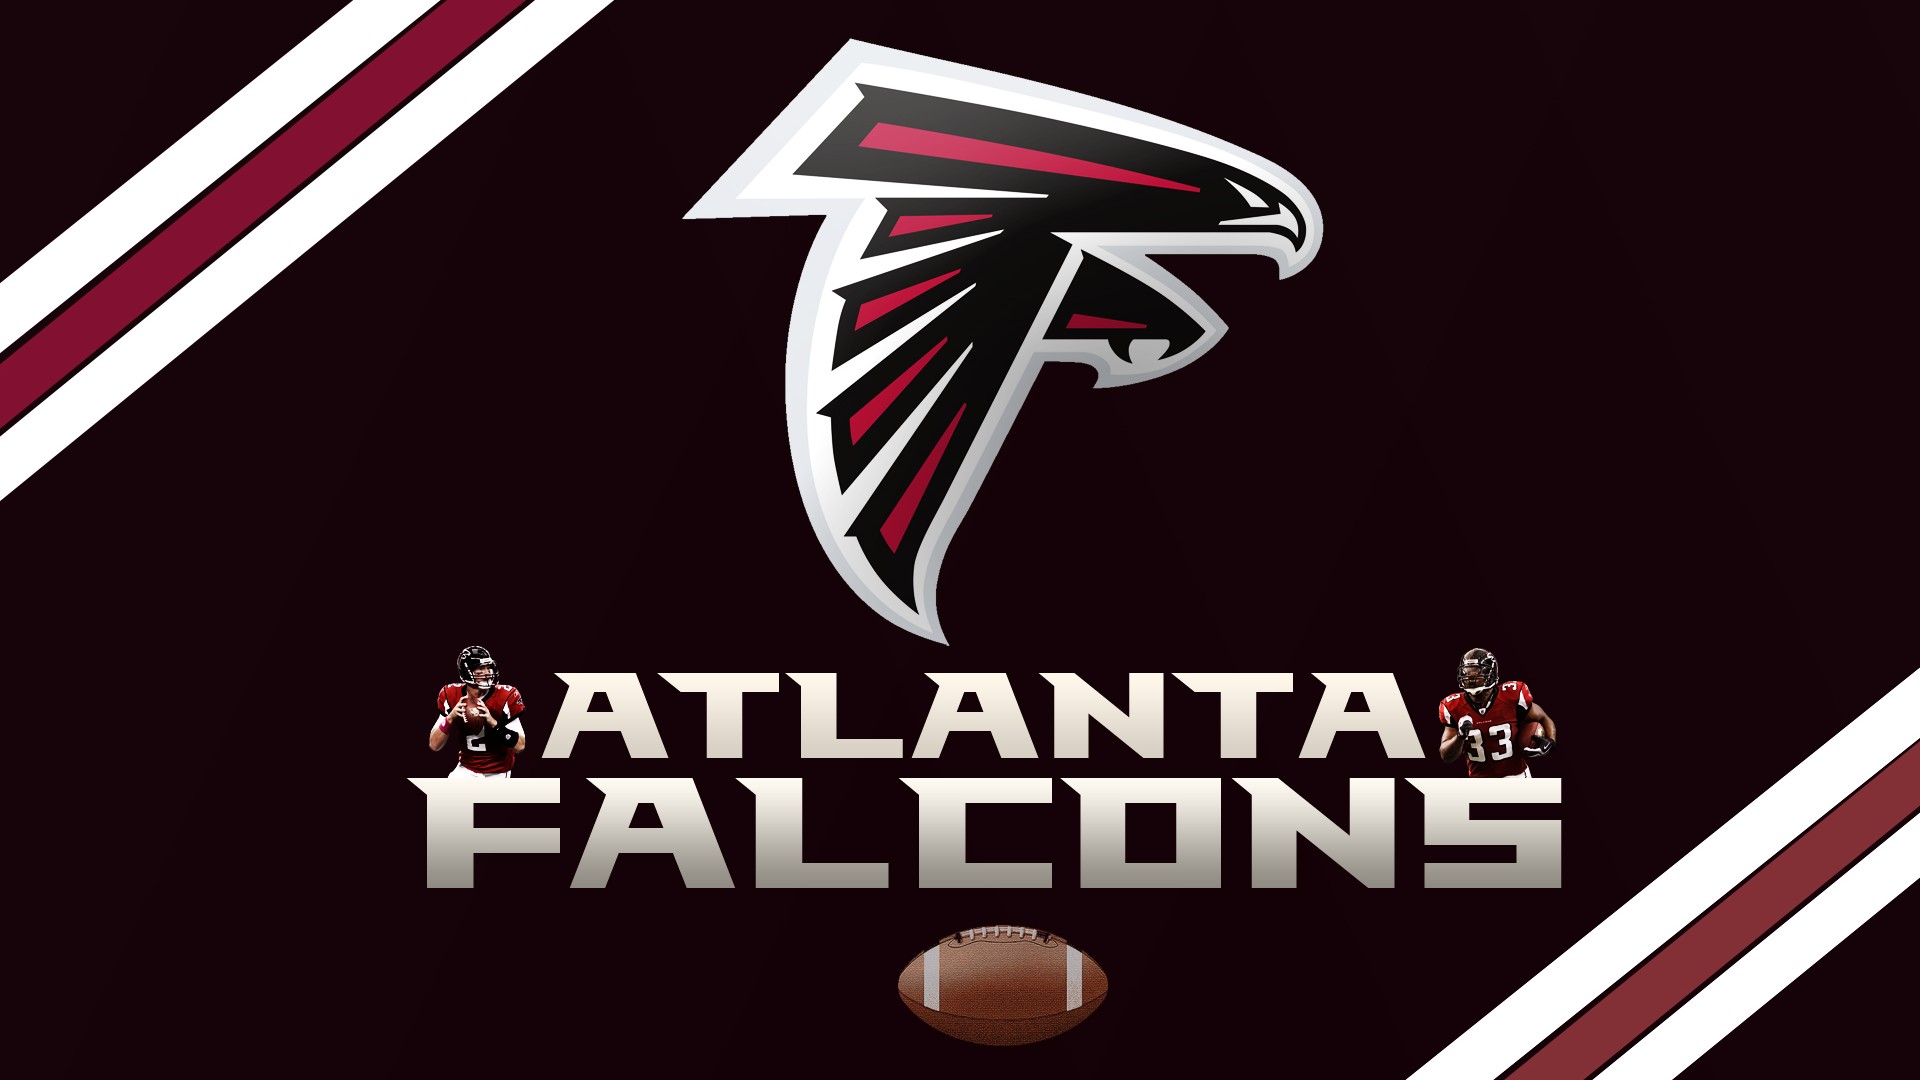 HD Falcons Backgrounds with high-resolution 1920x1080 pixel. You can use this wallpaper for your Mac or Windows Desktop Background, iPhone, Android or Tablet and another Smartphone device